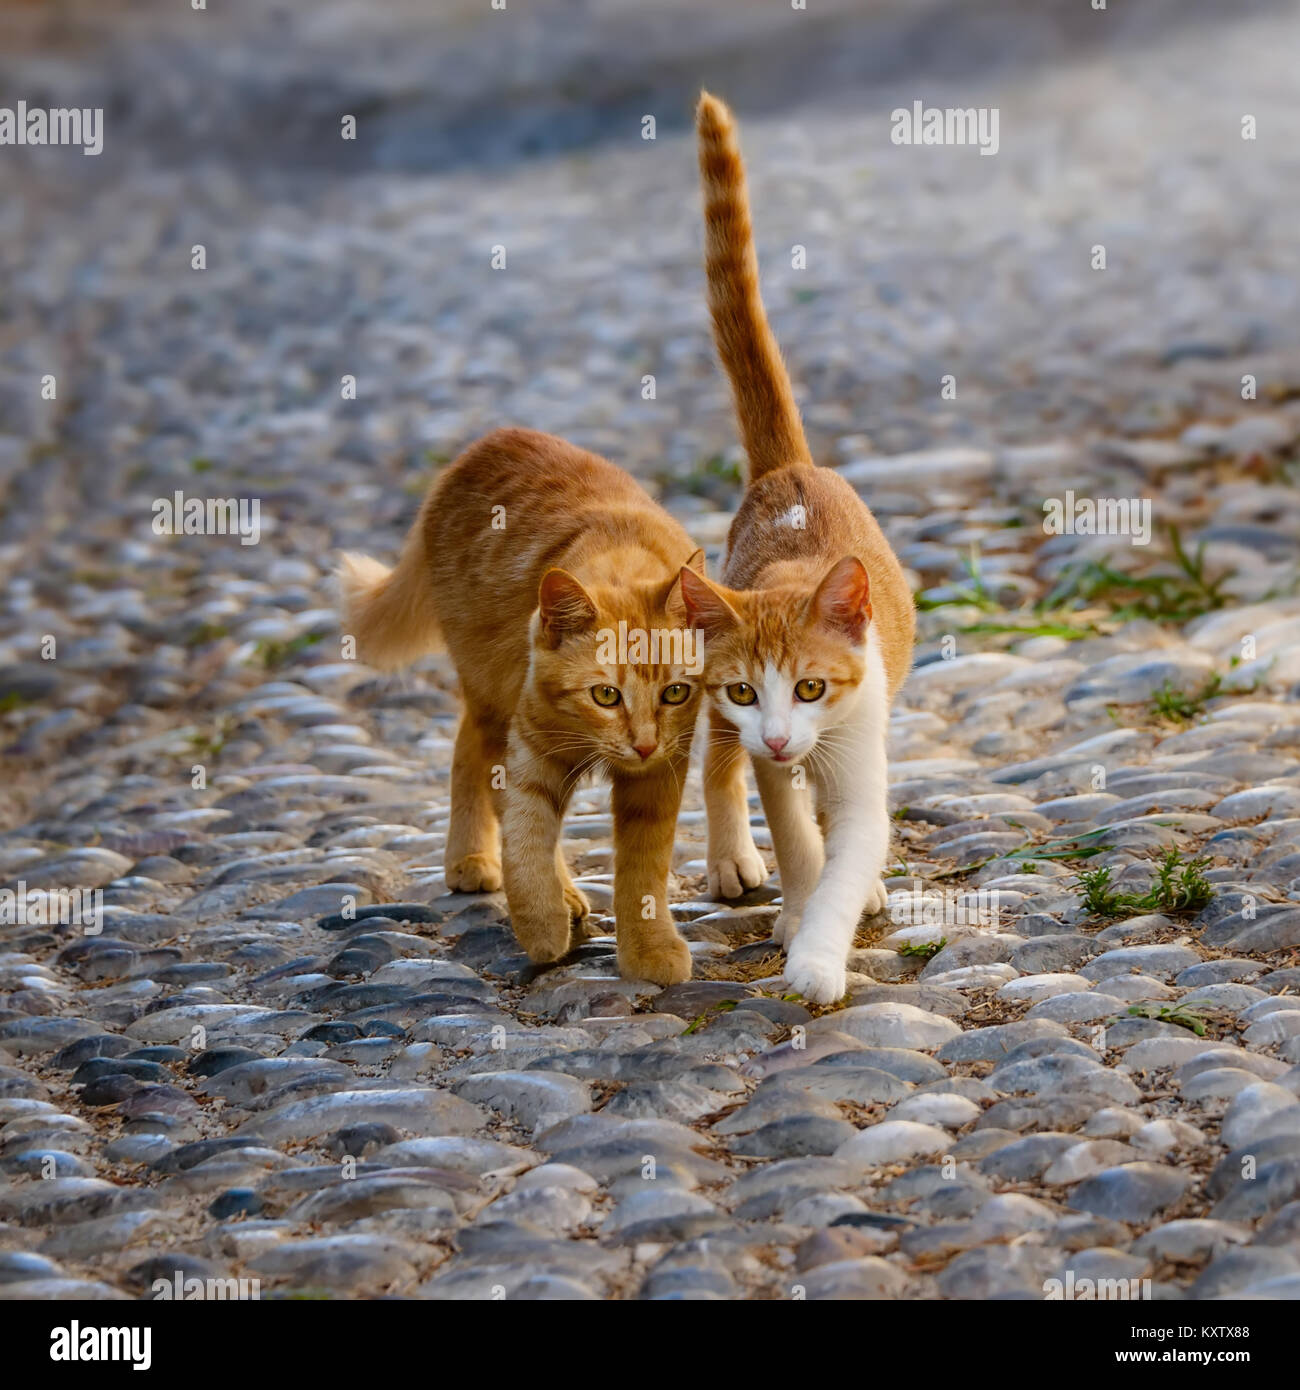 Two cute companioned cat kittens team up and walking side by side the same stony cobblestone path, Rhodes, Greece. Stock Photo